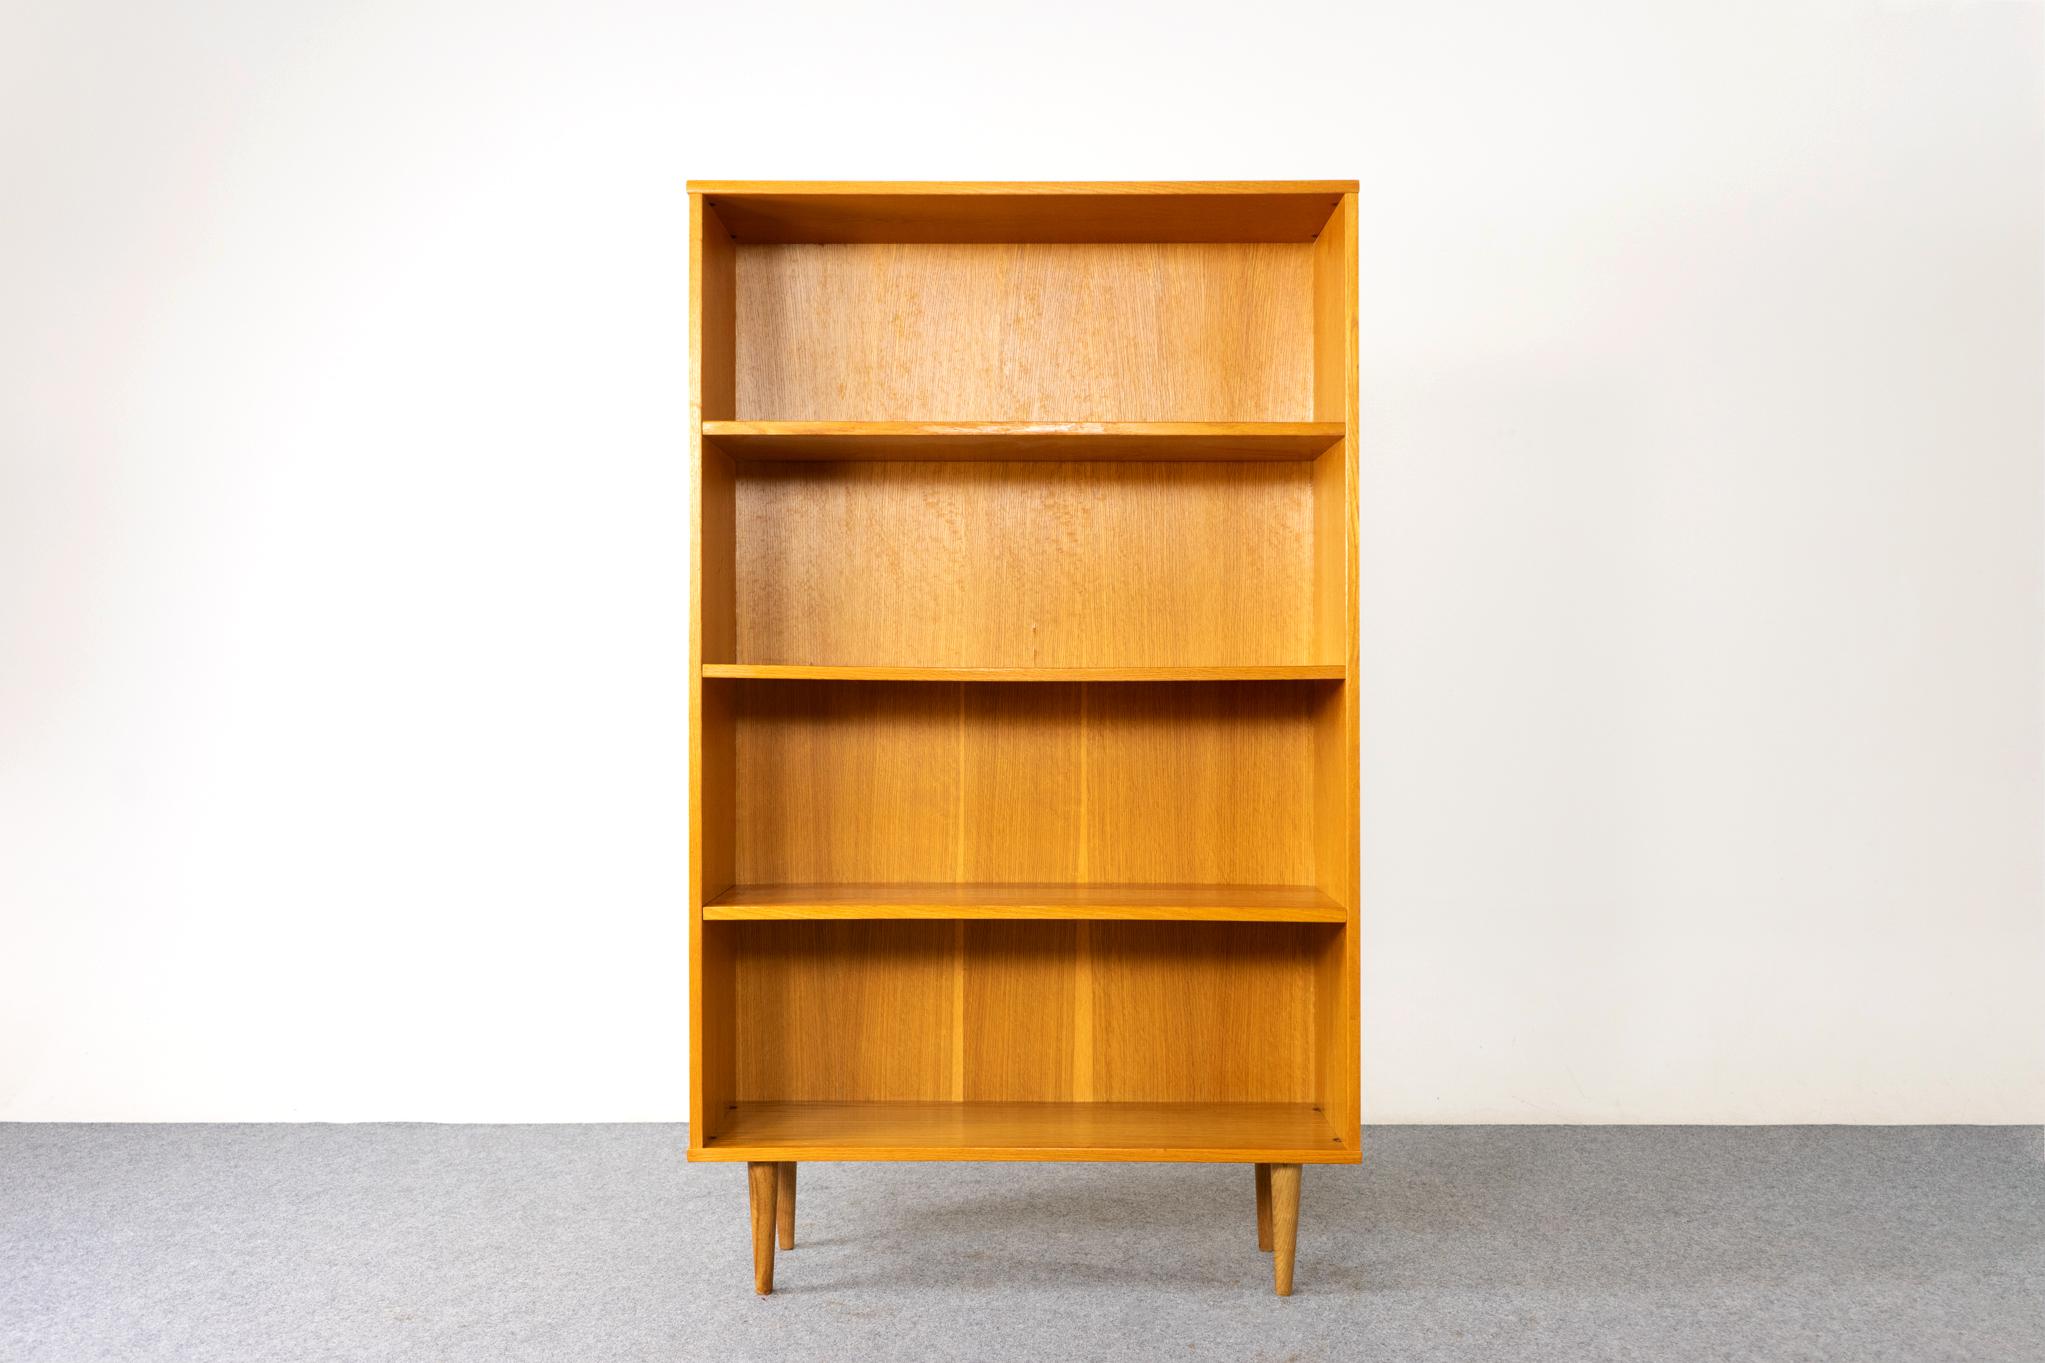 Oak Danish bookcase, circa 1960's. Open bookcase with adjustable shelving and lovely gain. Removable legs and compact design makes it the perfect condo sized storage solution. 

Unrestored item, some marks consistent with age.

Please inquire for